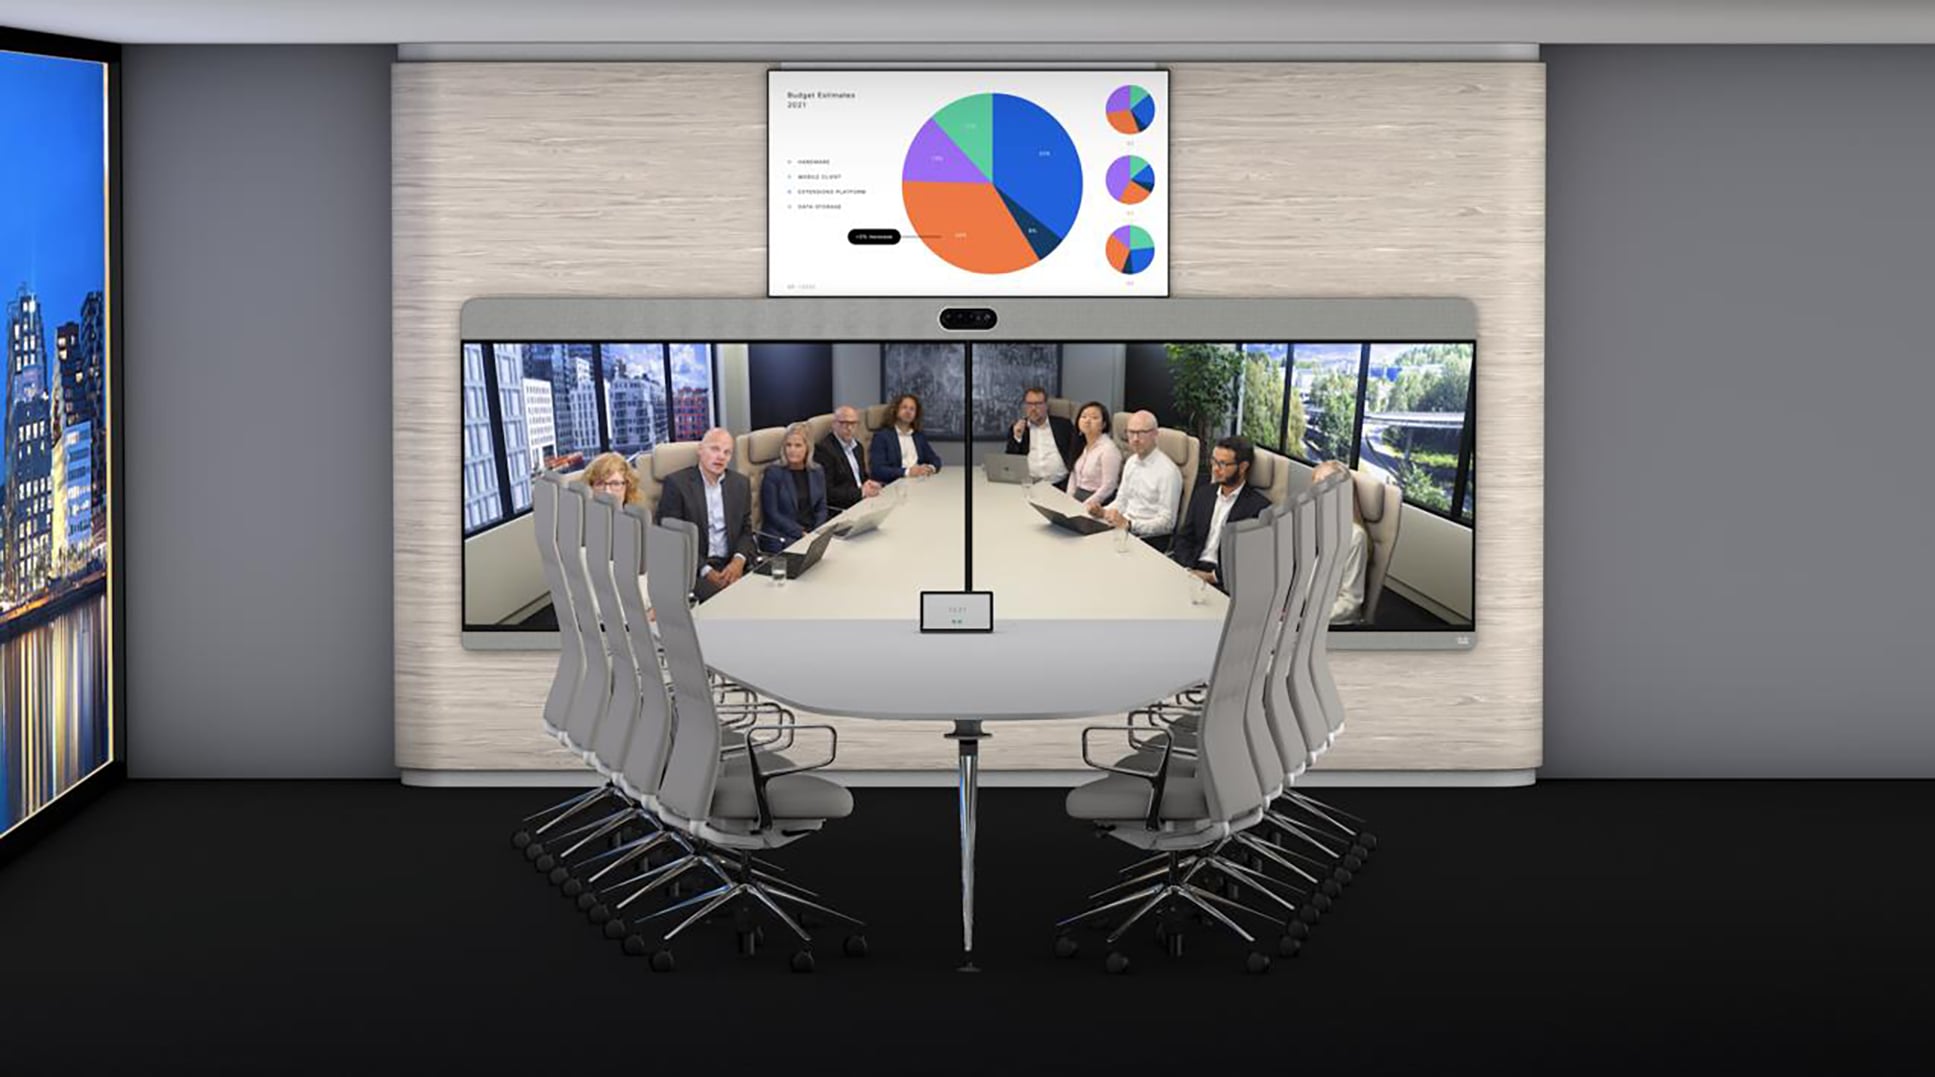 Point-to-point meeting in a large conference room